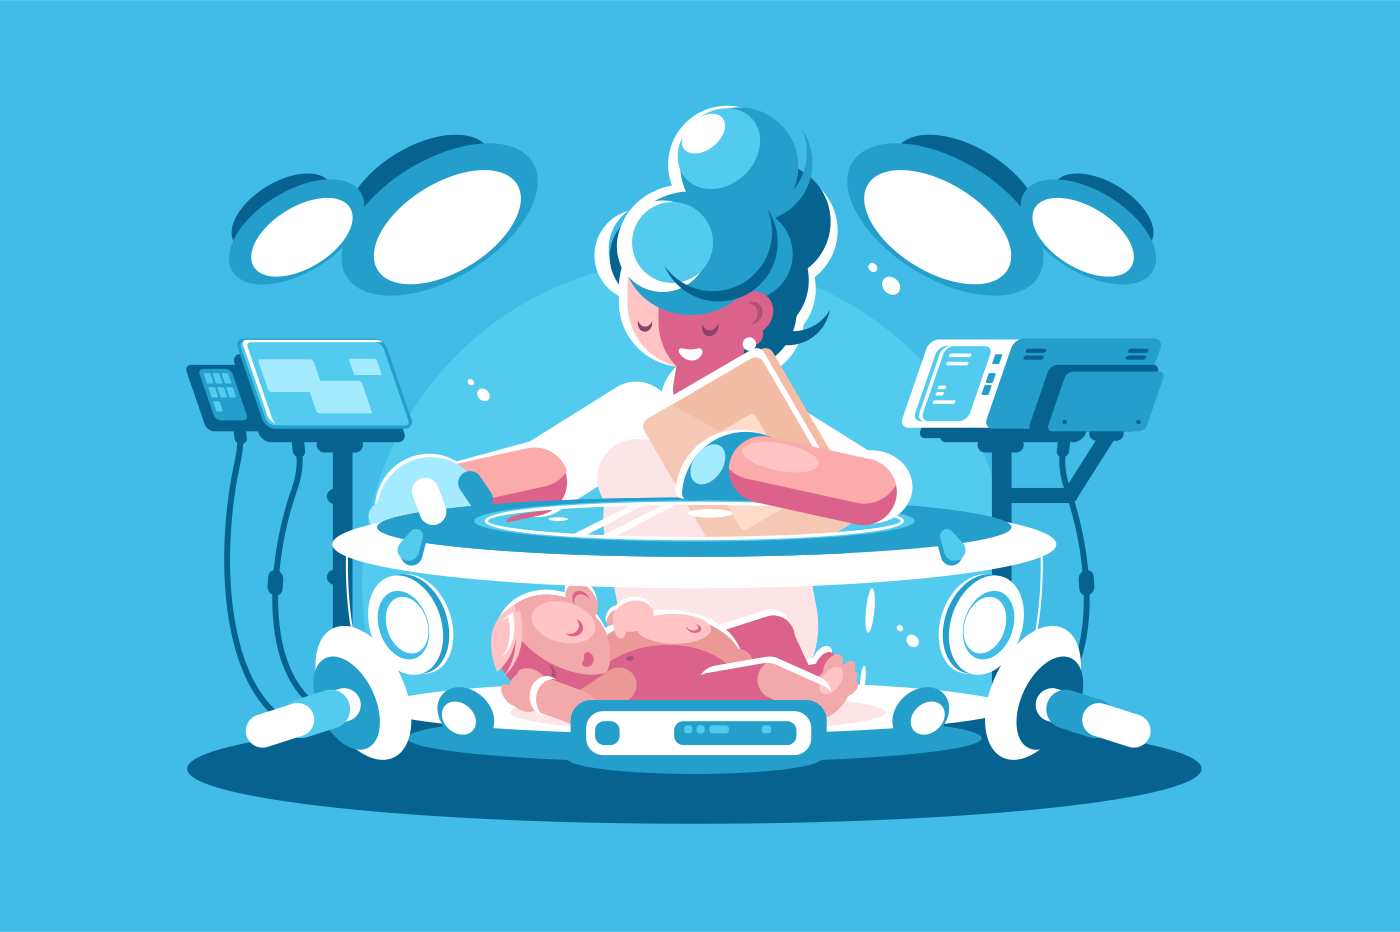 Nurse child incubator with baby. Concept medicine help, protect people, future technology. Vector illustration.